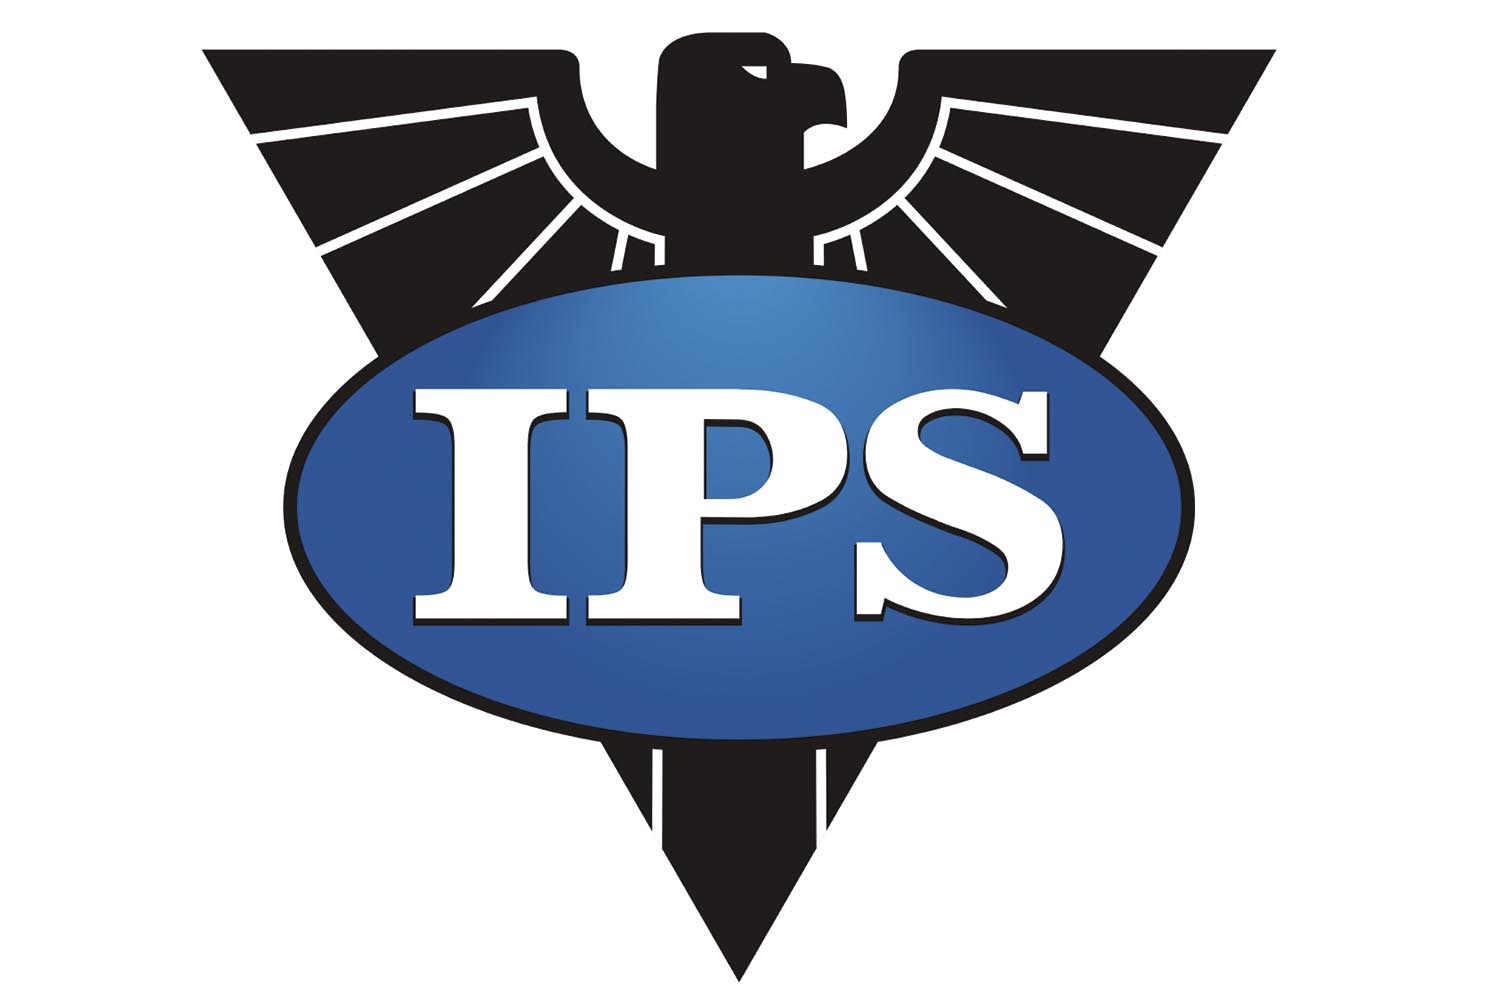 Intrusion Prevention Systems (IPS) in Hindi - Computer Networks - Tech Guru